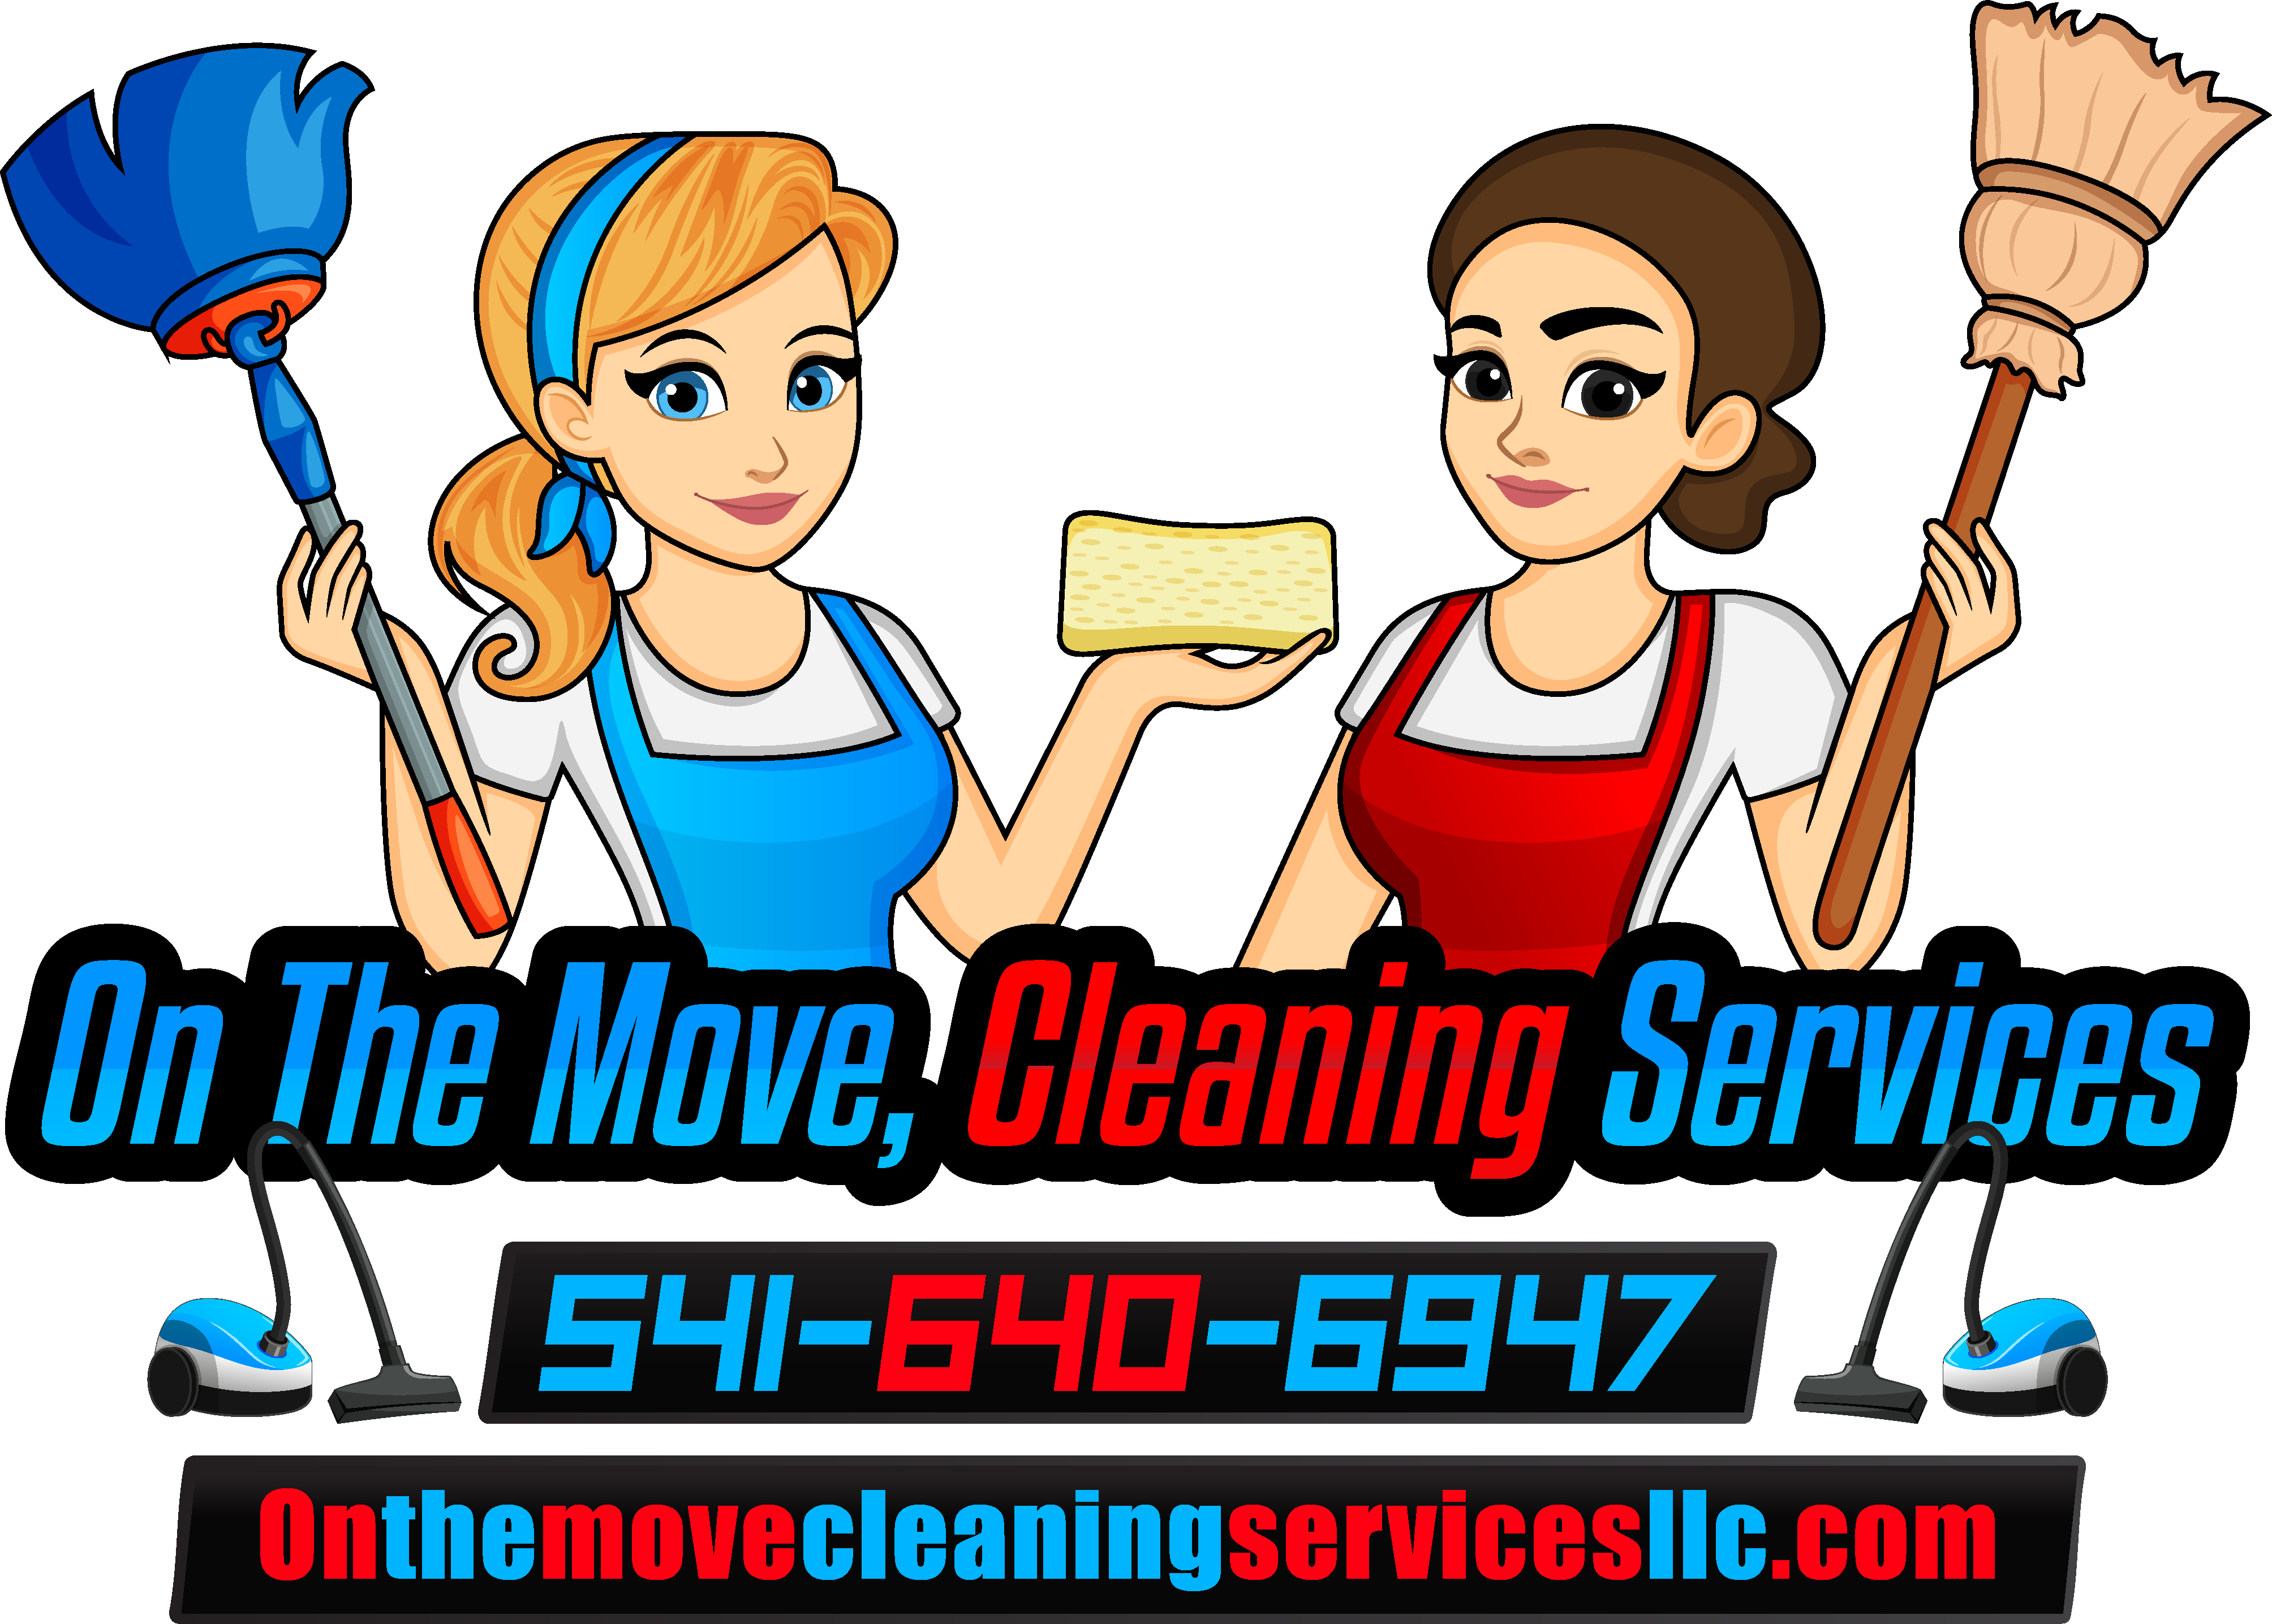 On the Move Cleaning Services LLC